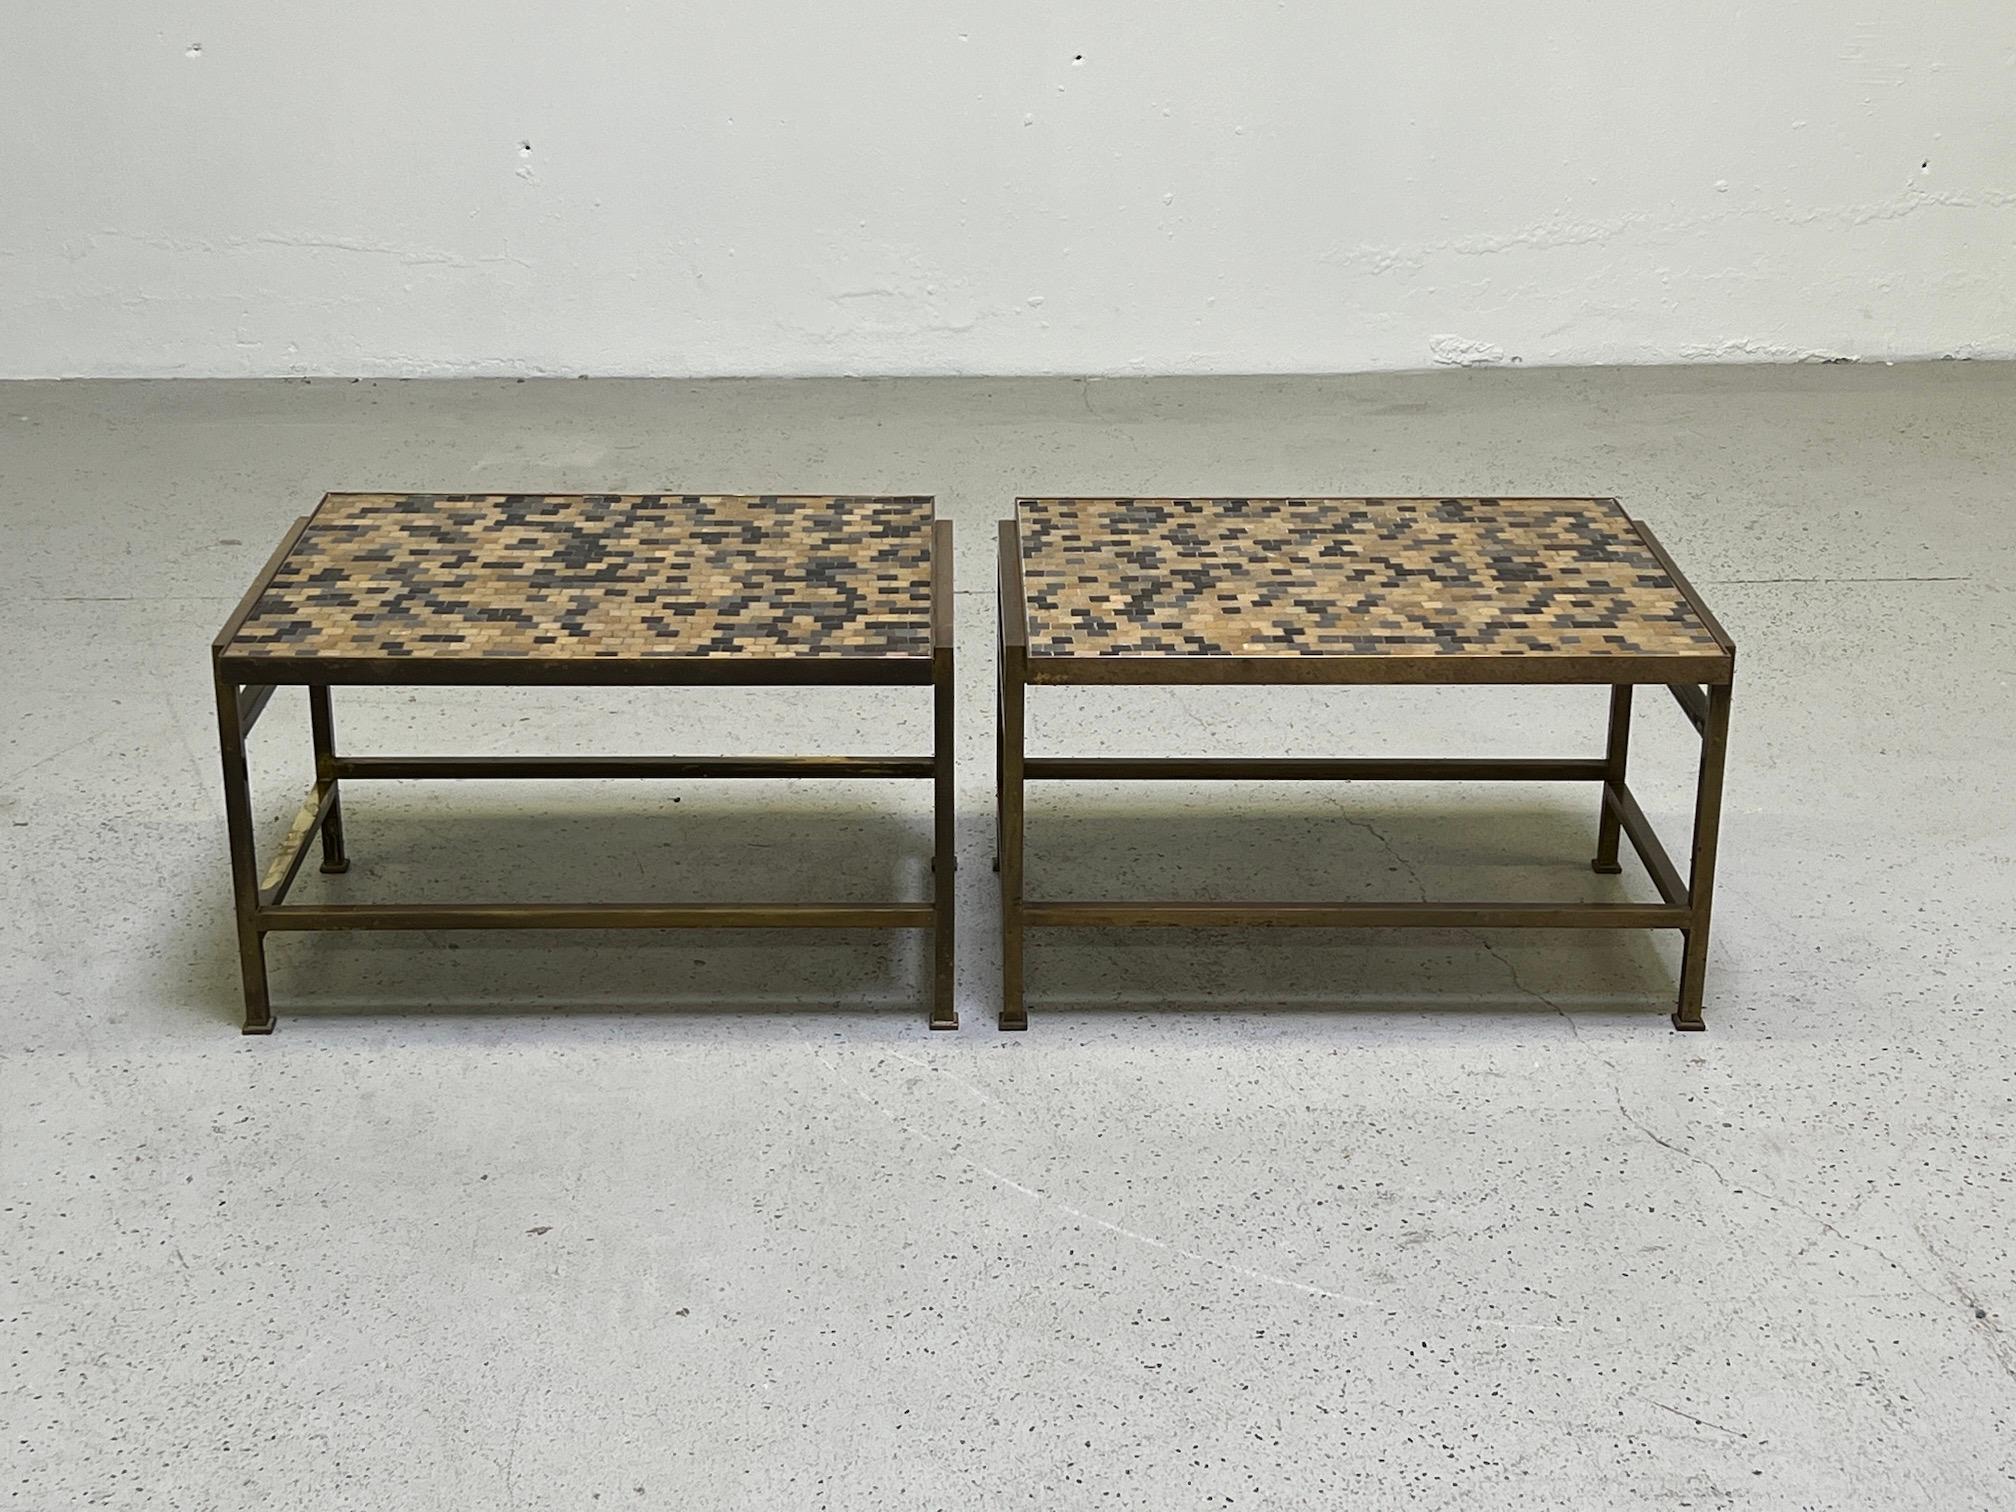 Brass Pair of Murano Glass Tile Top Tables by Edward Wormley for Dunbar